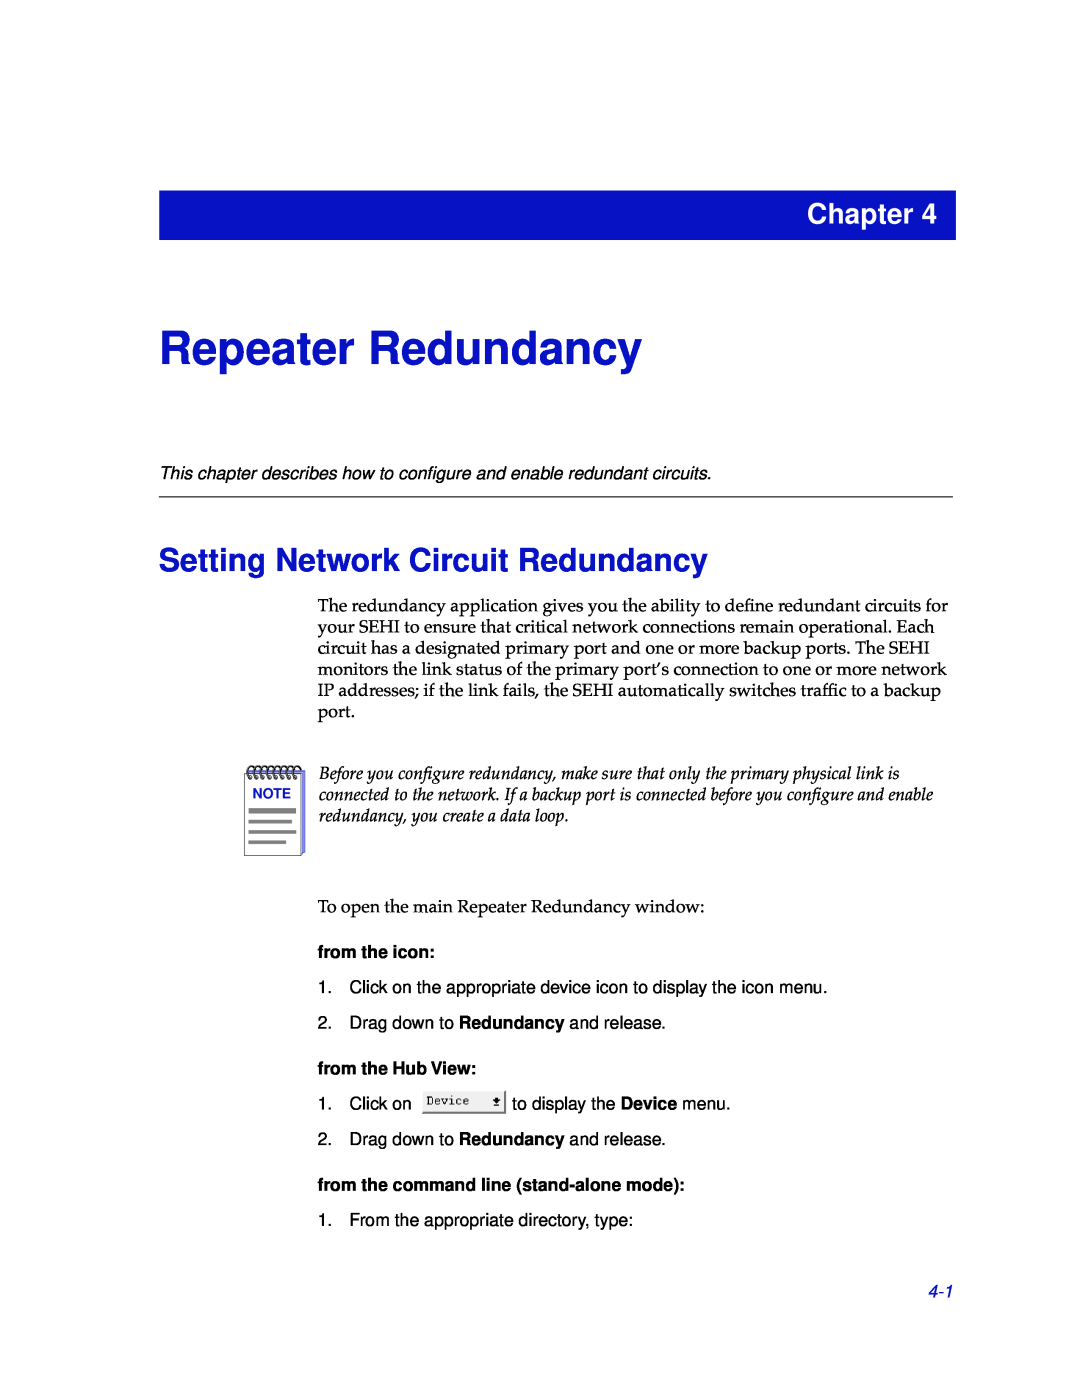 Cabletron Systems SEHI-22/24, SEHI-32/34 Repeater Redundancy, Setting Network Circuit Redundancy, Chapter, from the icon 